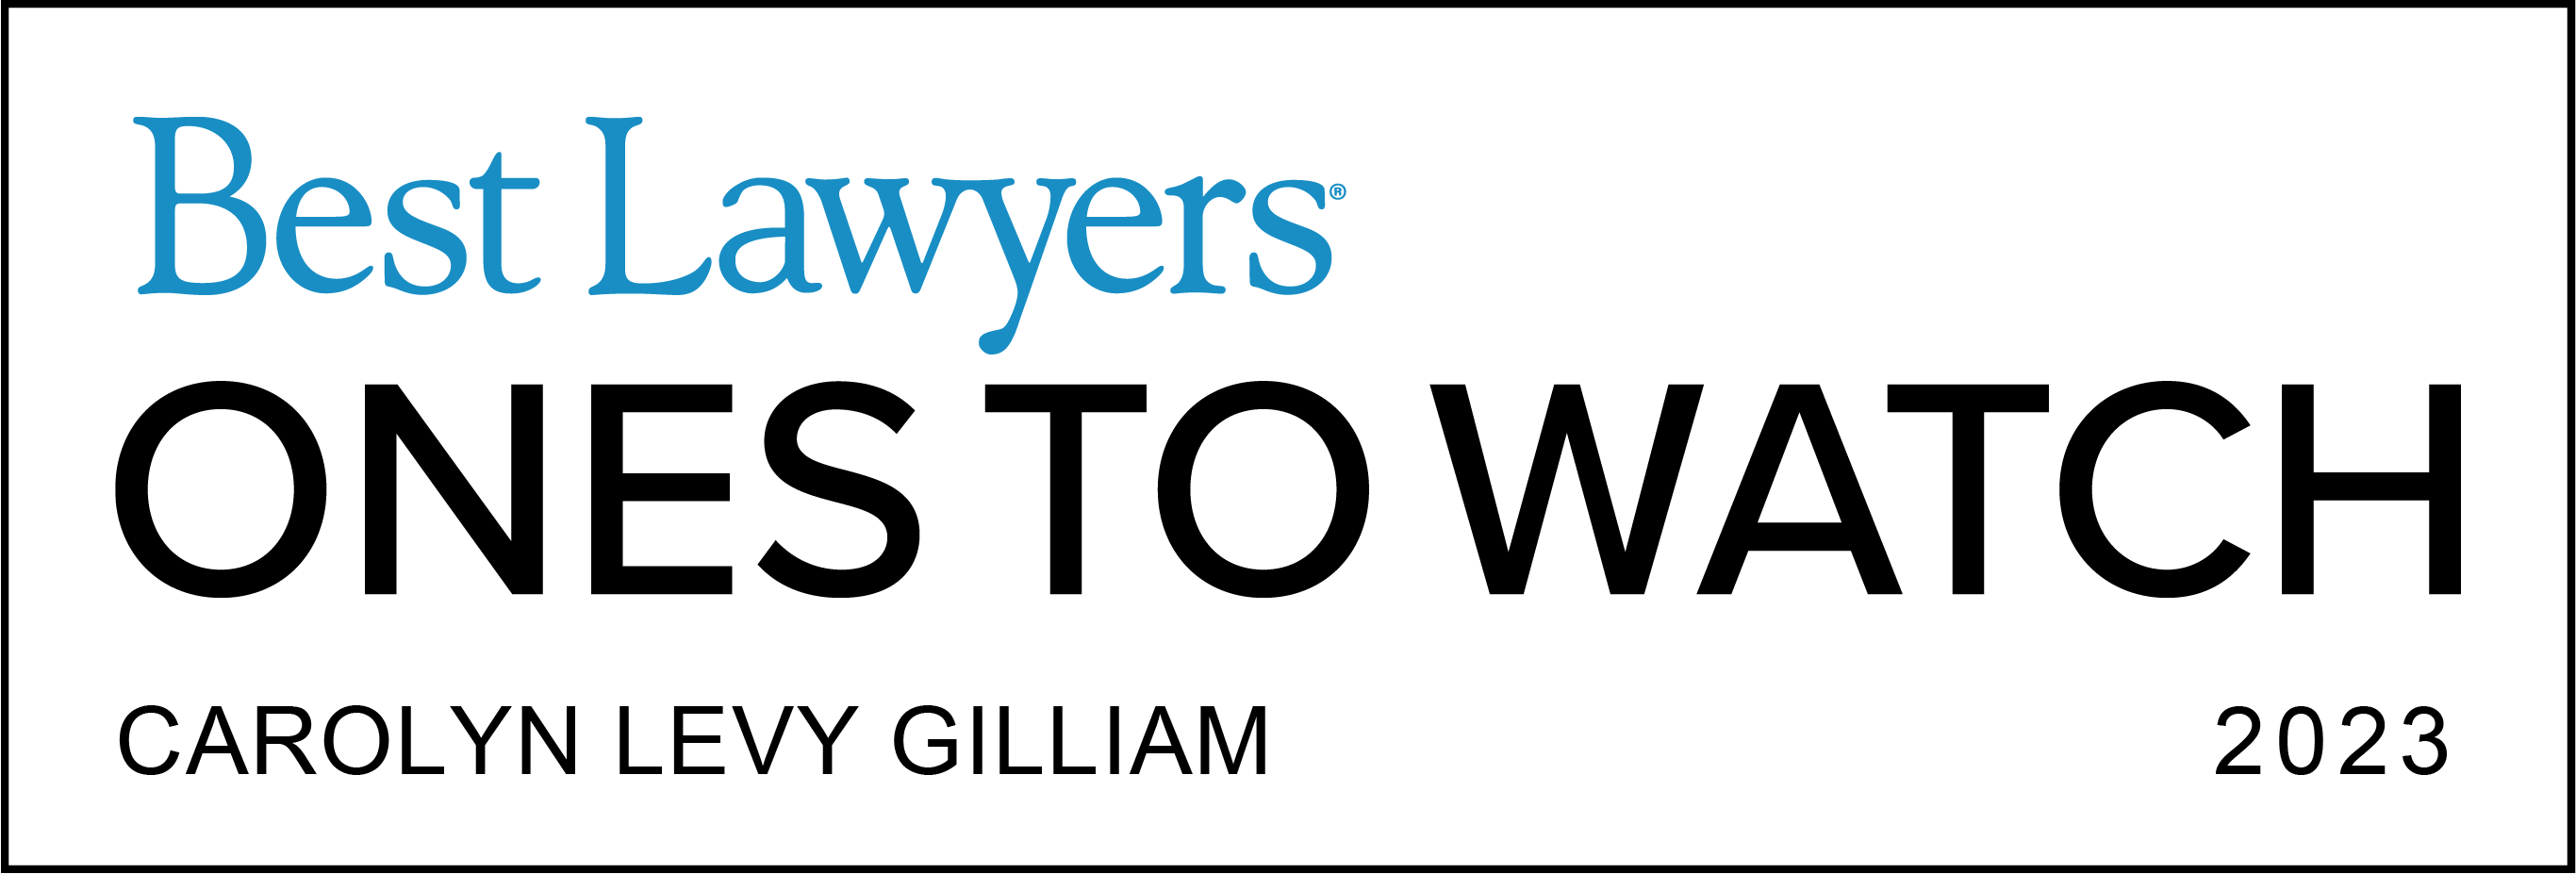 Carolyn Levy Gilliam Best Lawyers Ones to Watch 2023